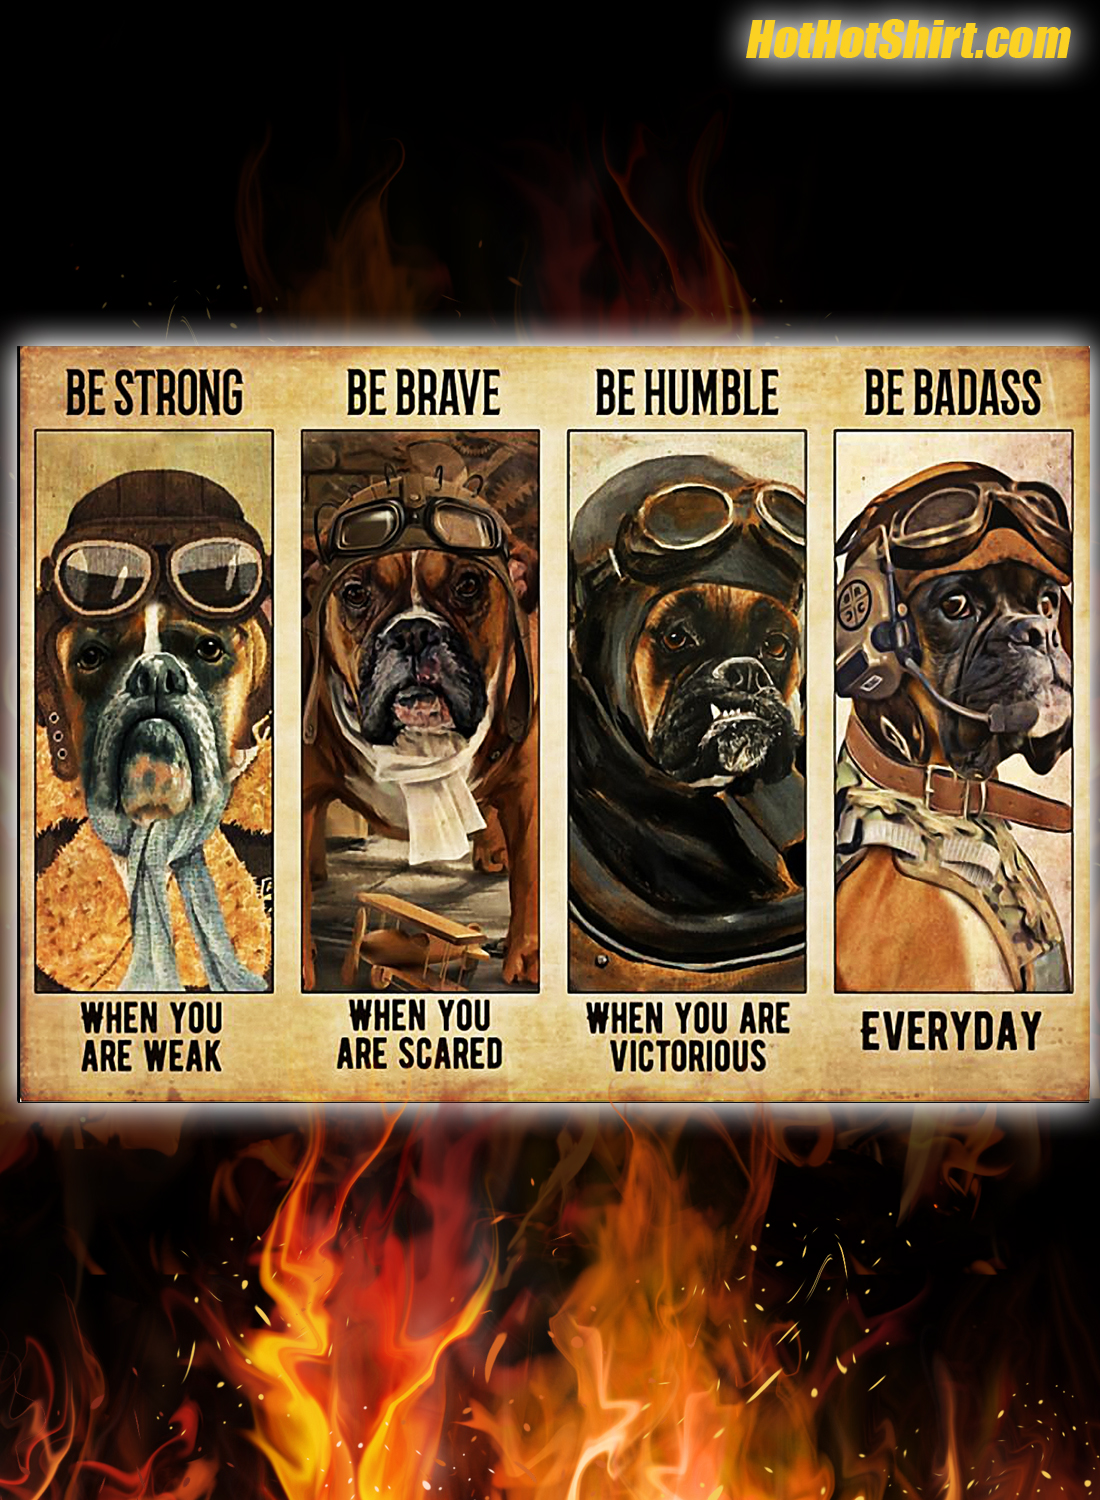 Boxer pilot be strong be brave be humble be badass poster